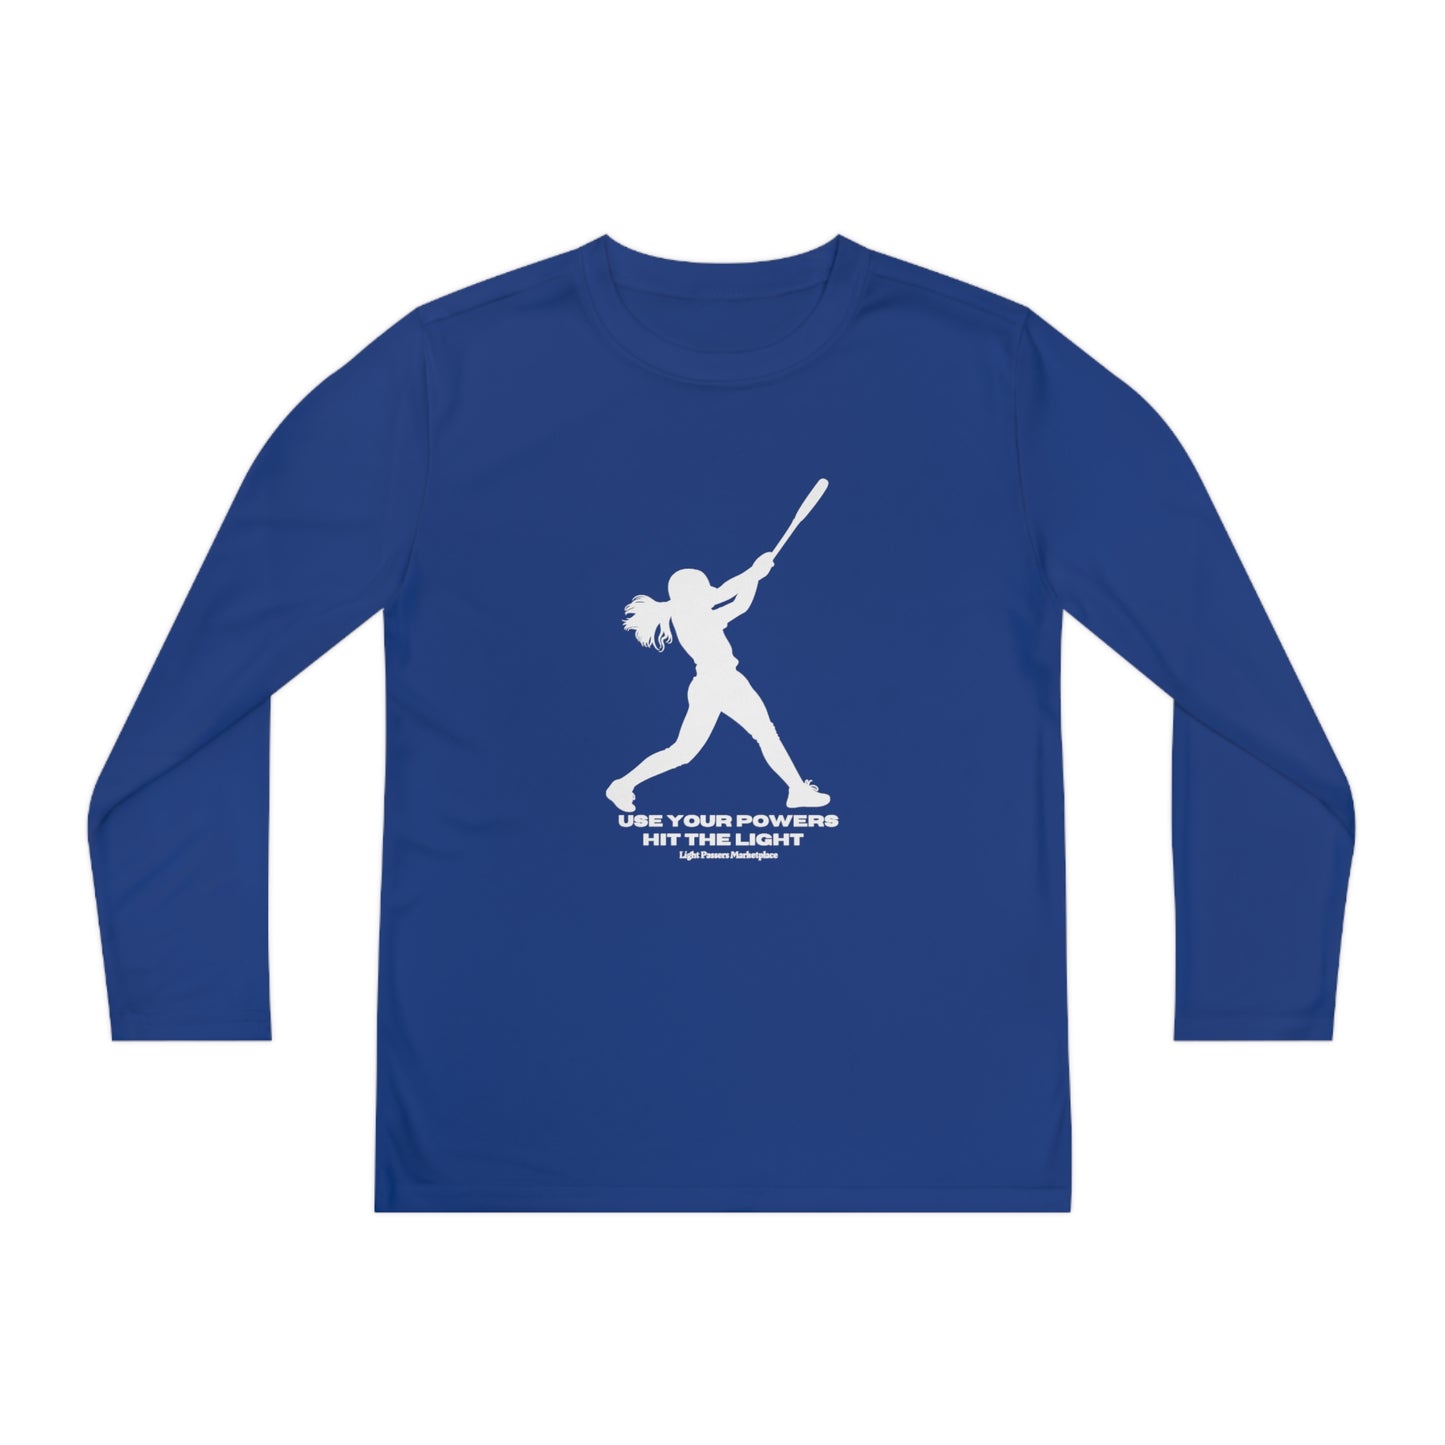 Youth long sleeve shirt featuring a white silhouette of a girl swinging a bat. Made of 100% moisture-wicking polyester with an athletic fit and tear-away label. Ideal for active kids.